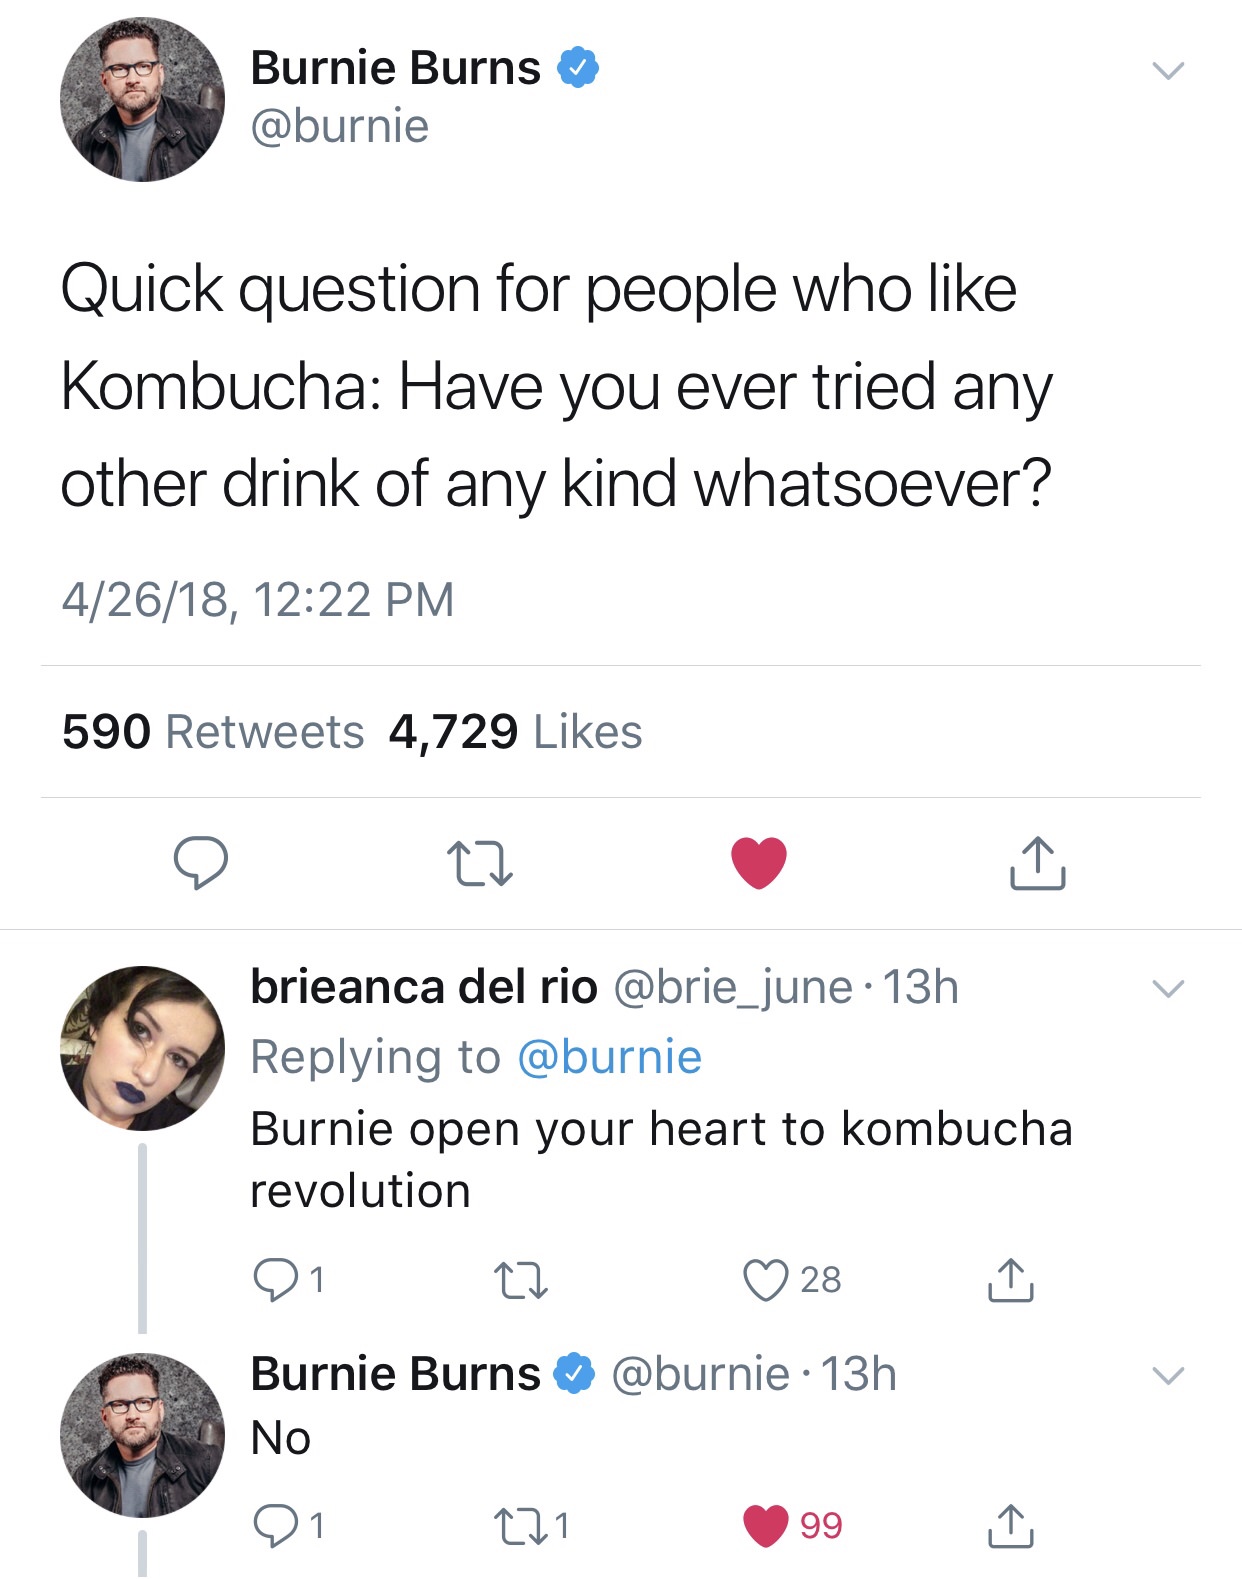 screenshot - Burnie Burns Quick question for people who Kombucha Have you ever tried any other drink of any kind whatsoever? 42618, 590 4,729 brieanca del rio 13h Burnie open your heart to kombucha revolution 01 to 28 Burnie Burns 13h No 21 221 99